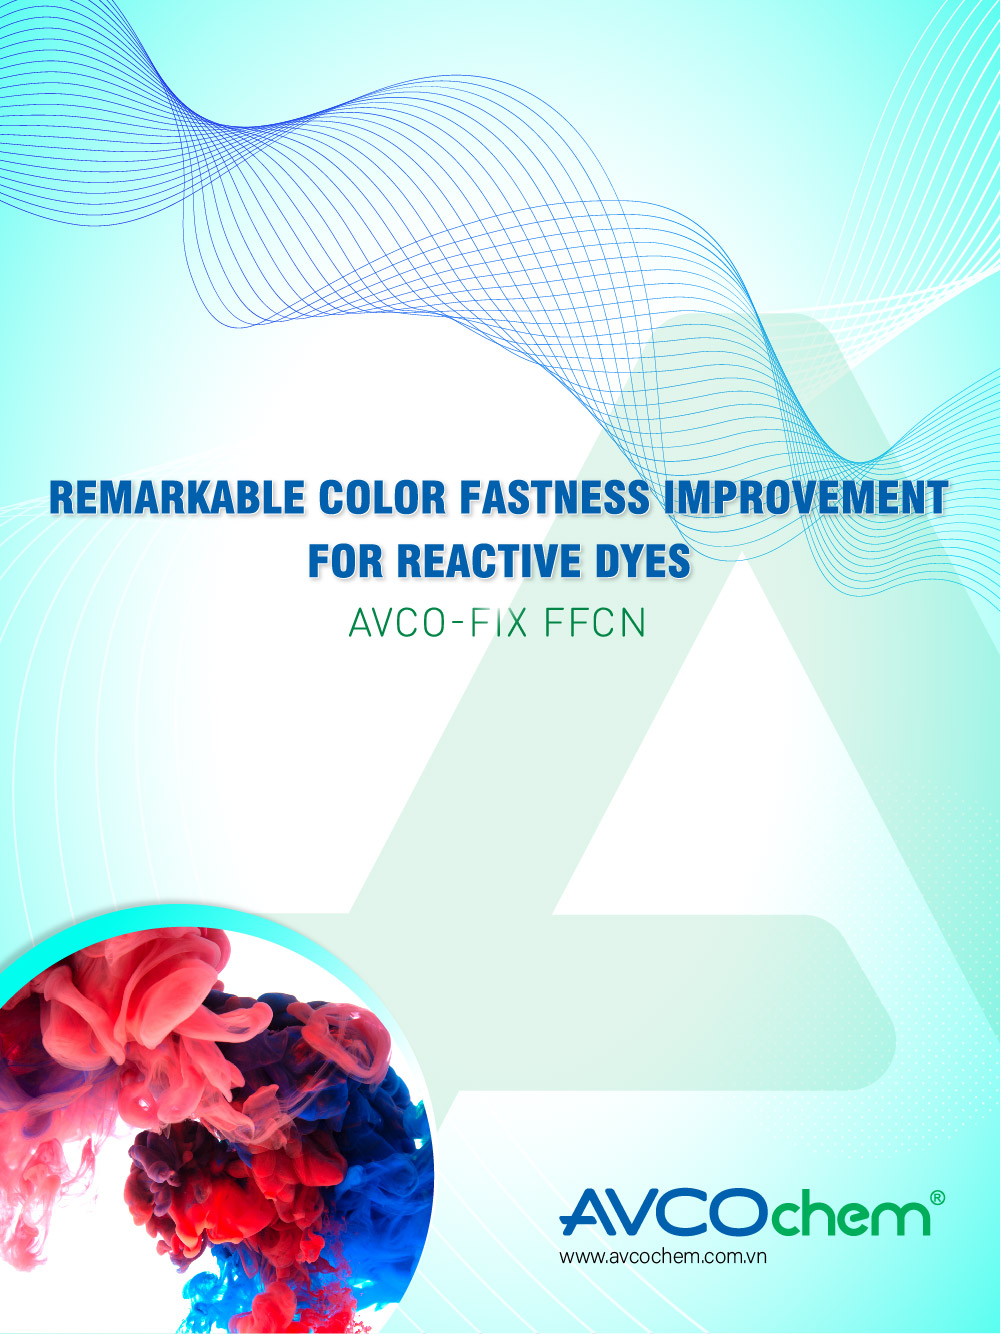 REMARKABLE COLOUR FASTNESS IMPROVEMENT FOR REACTIVE DYES WITH AVCO-FIX FFCN